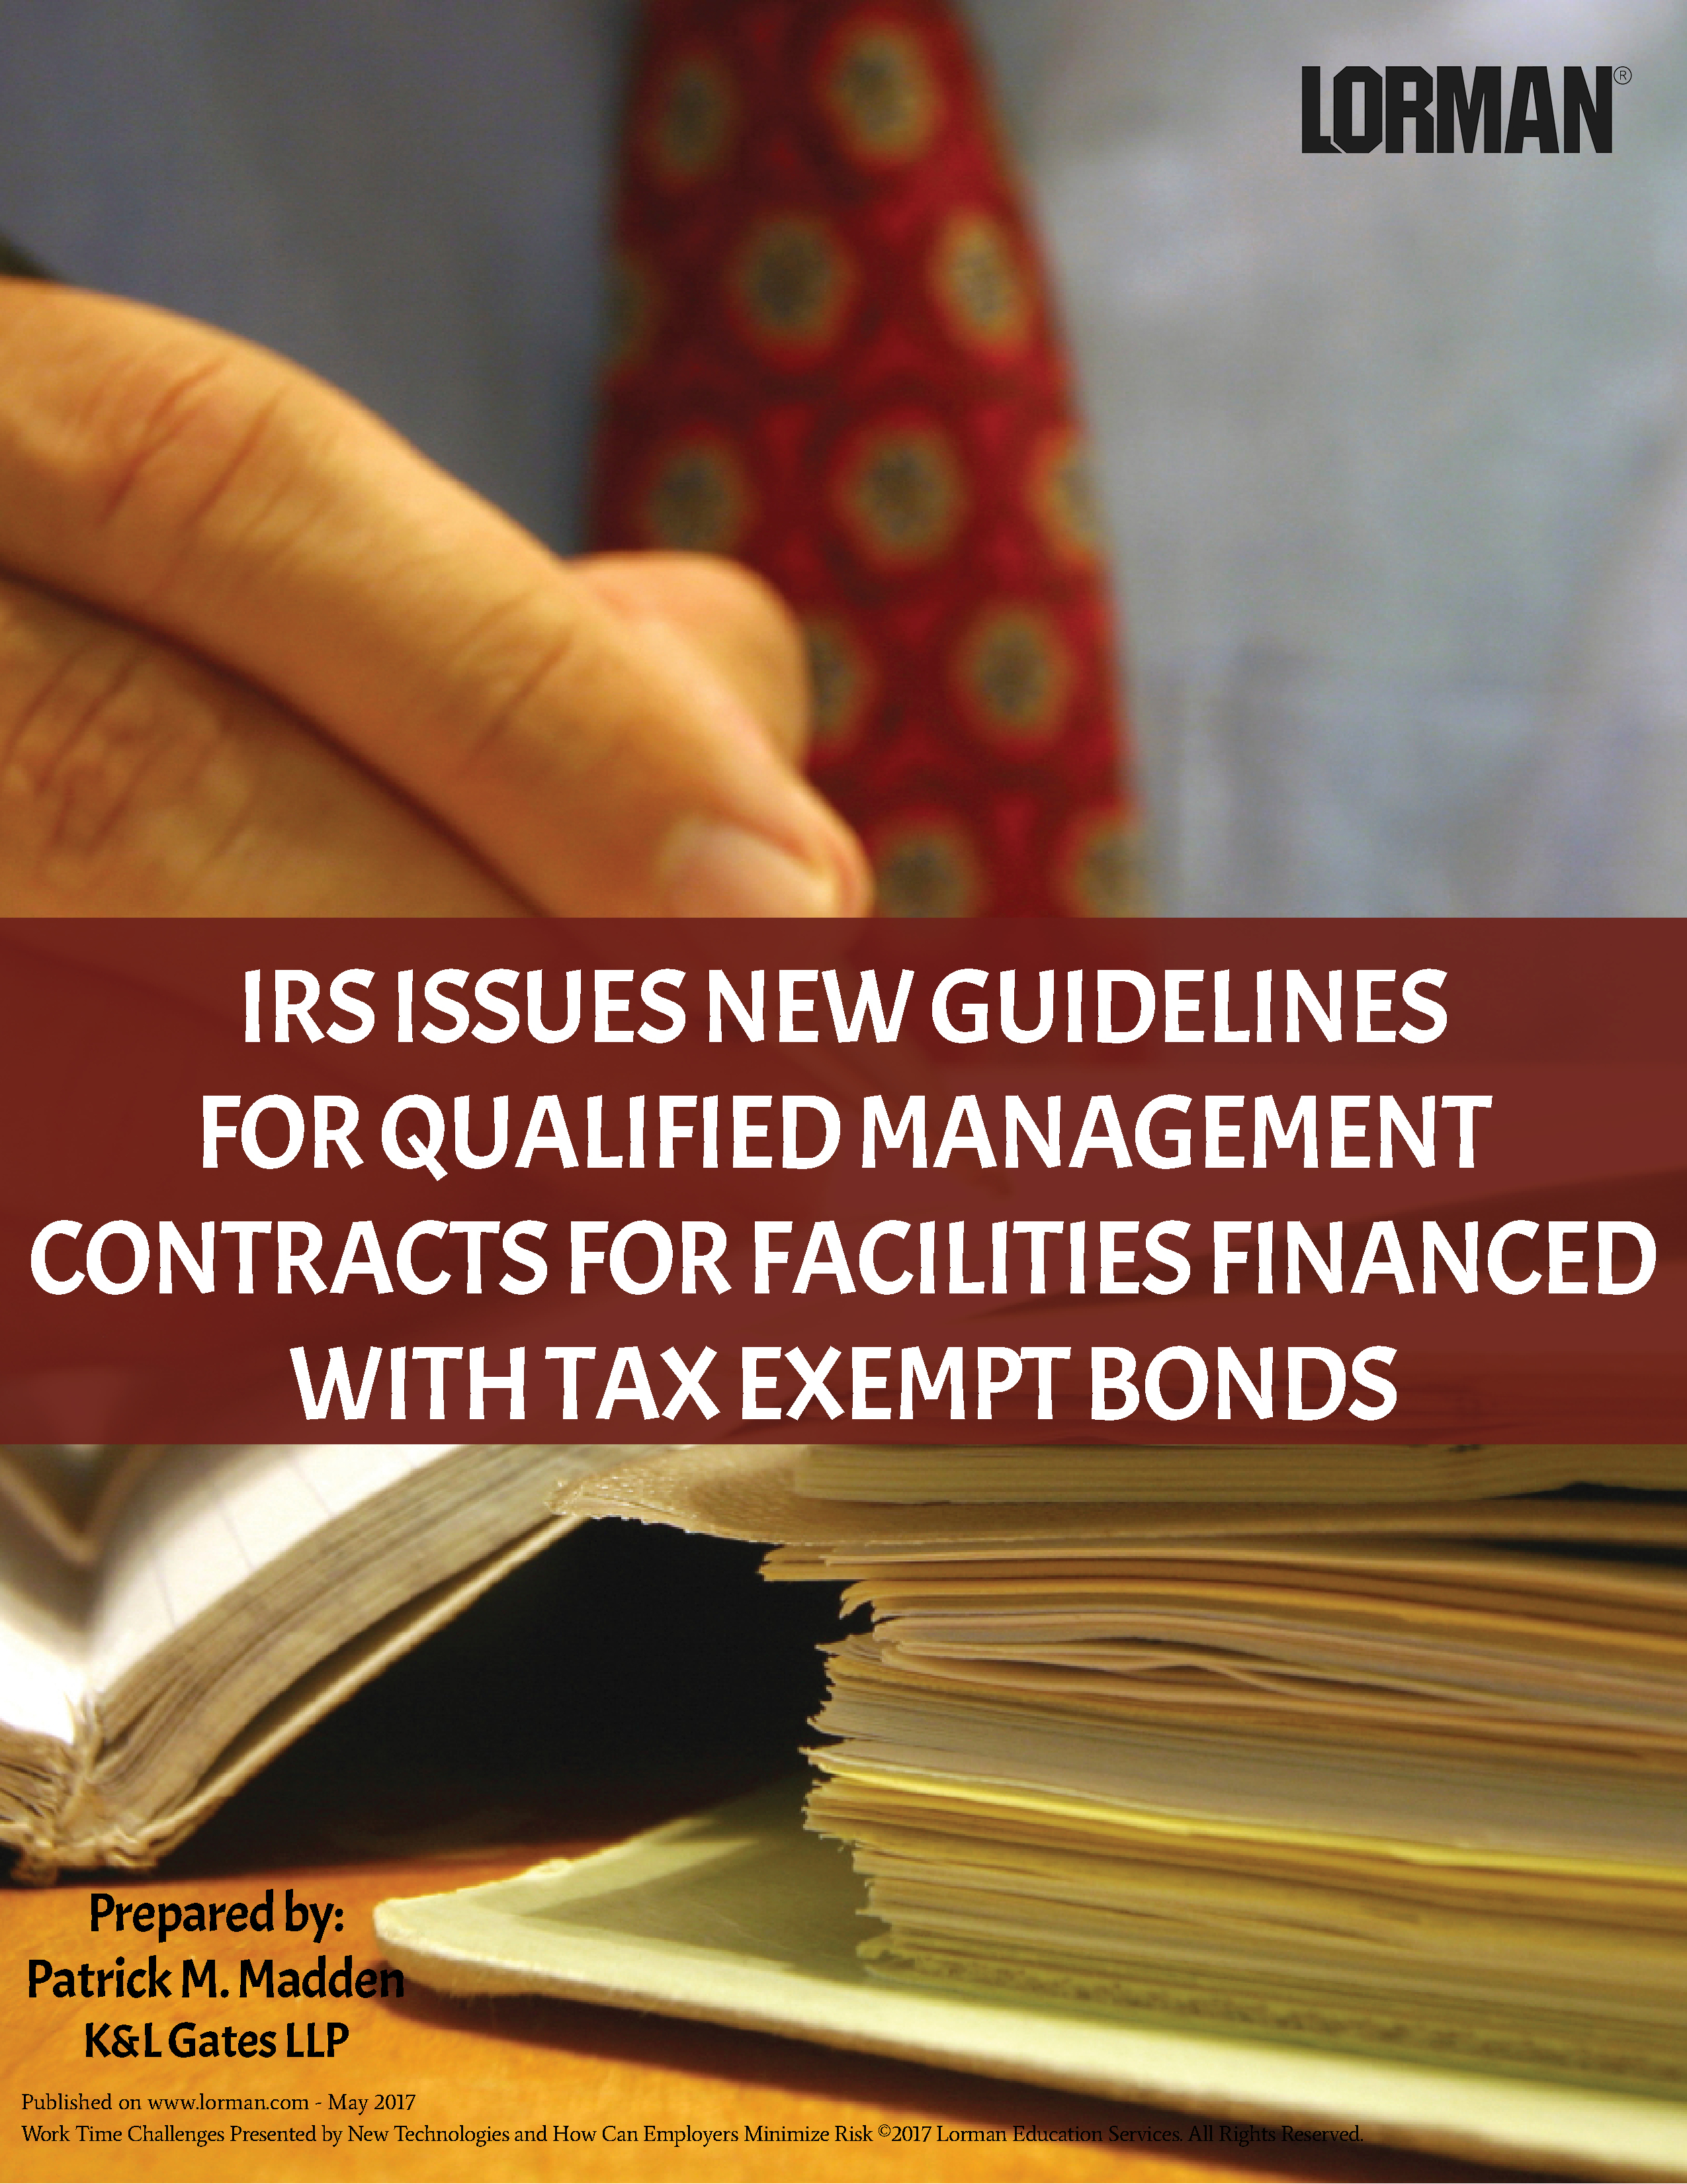 IRS Issues Guidelines for Qualified Management Contracts for Facilities Financed by Tax Exempt Bonds